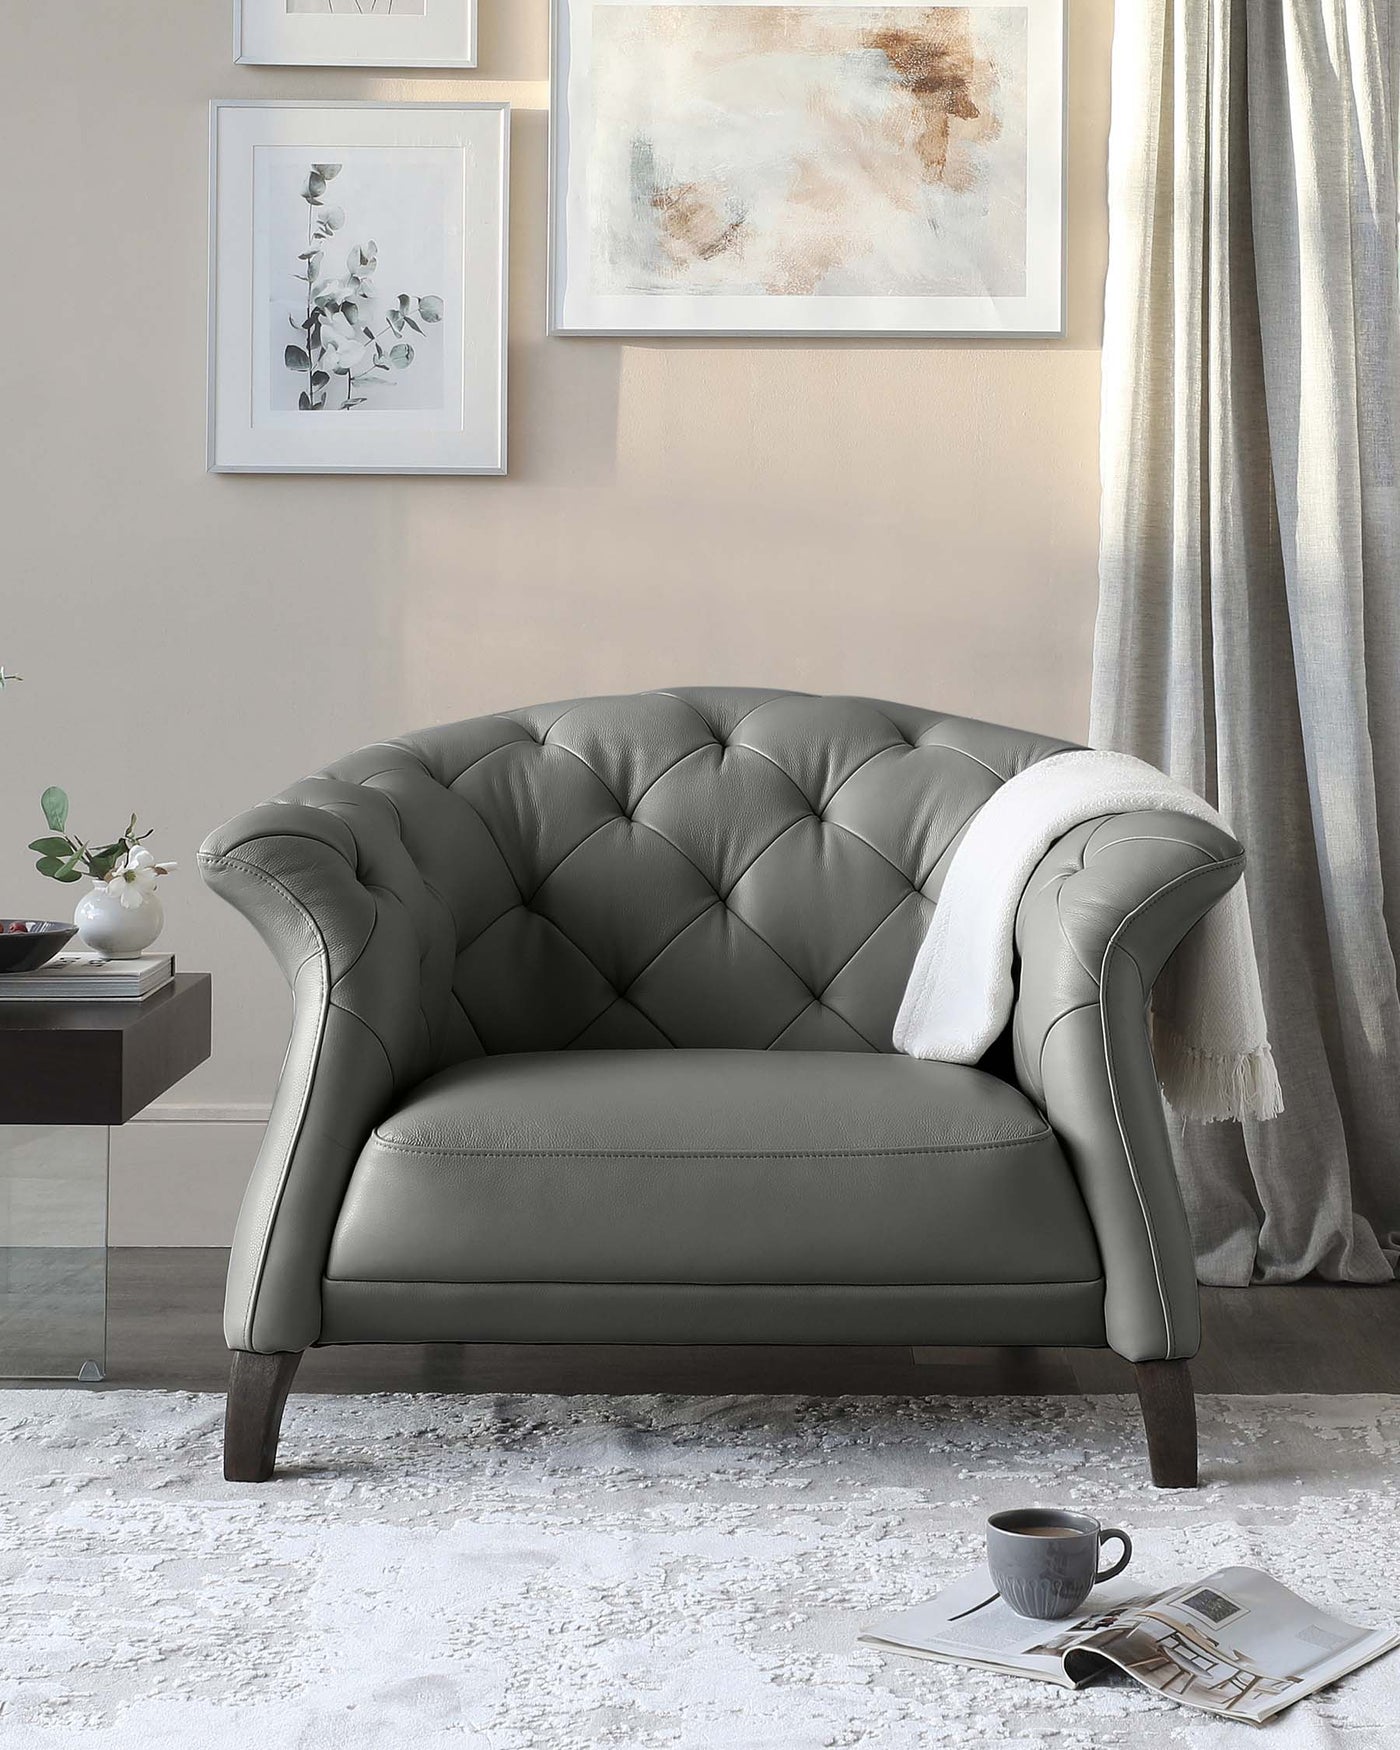 Elegant grey tufted loveseat with a classic chesterfield backrest, featuring dark wooden legs, accented with a white throw blanket draped over one arm, set against a neutral-toned living room backdrop with framed artwork, a silver-grey curtain, and a plush white area rug, with a coffee cup and magazine resting on the rug.